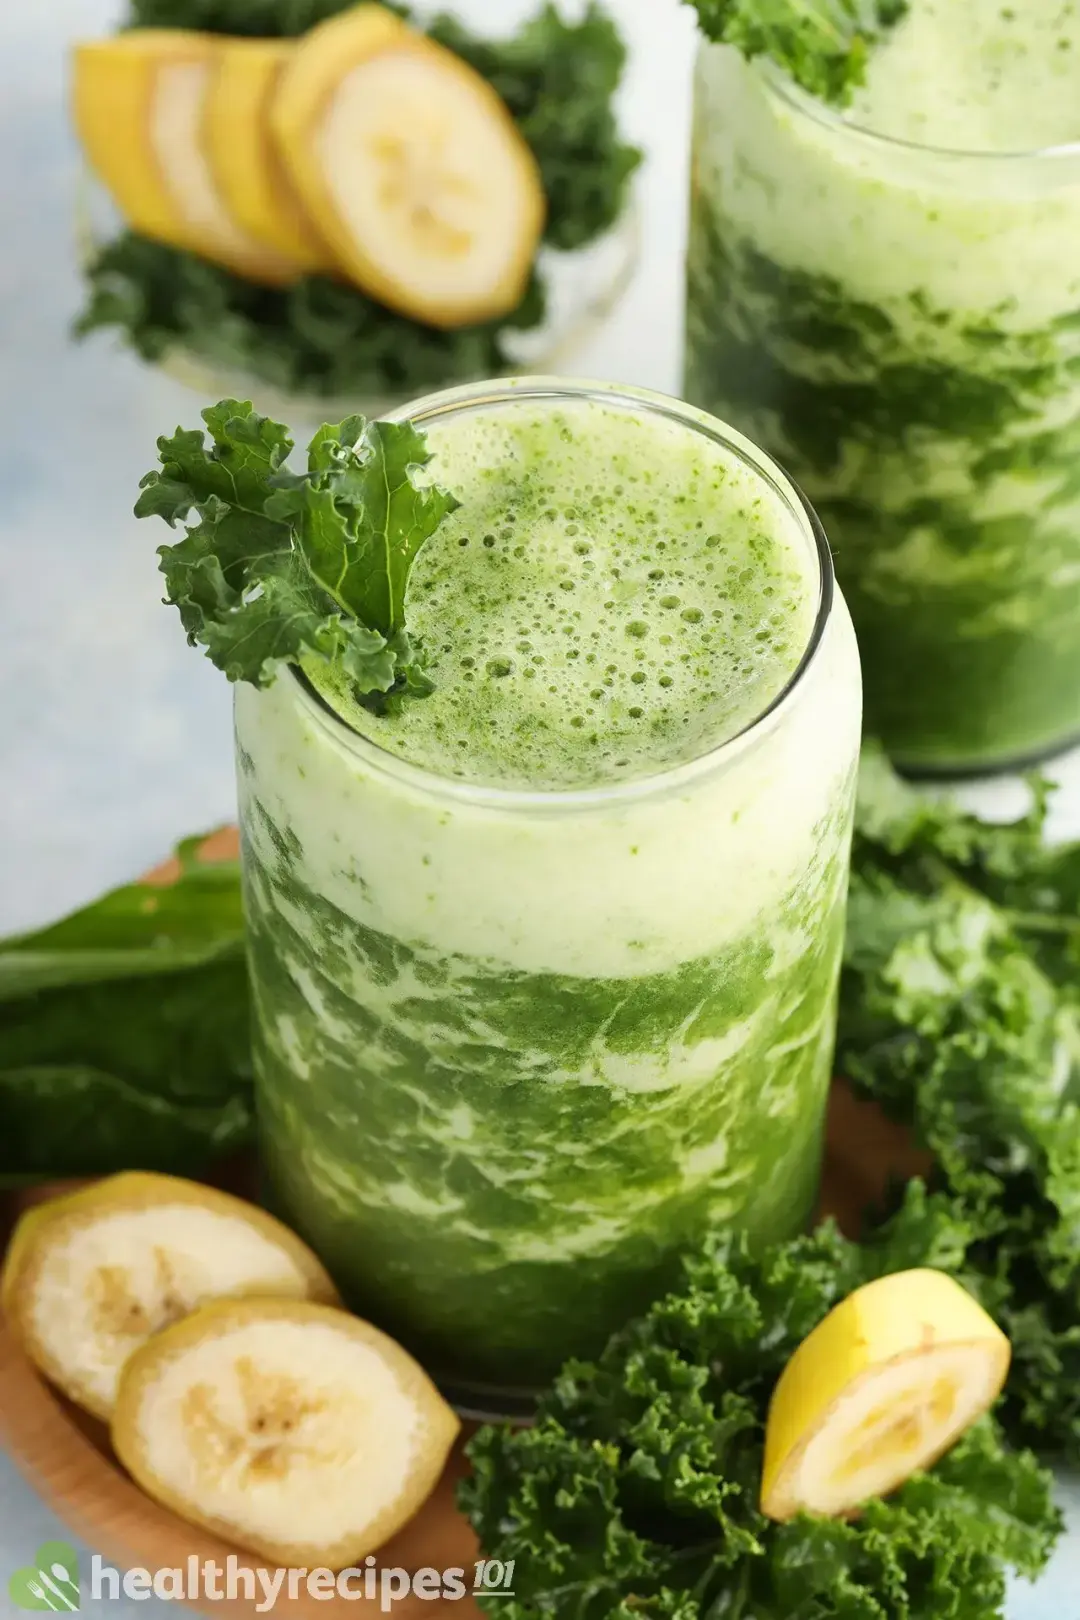 Kale Spinach Smoothie Recipe